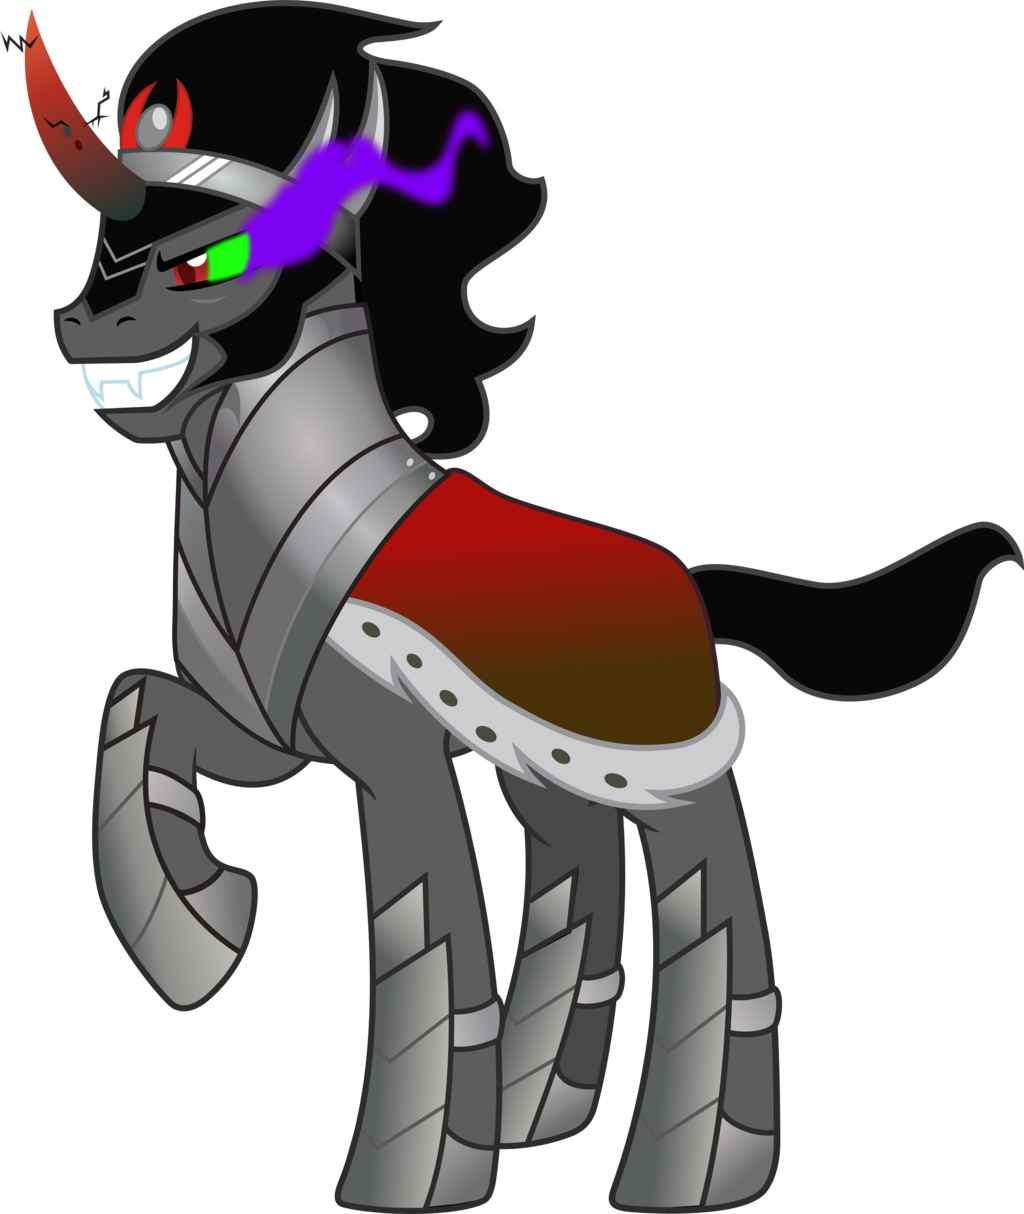 [Bild: King_sombra_vector_by_vaderpl-d5l38s4.png]